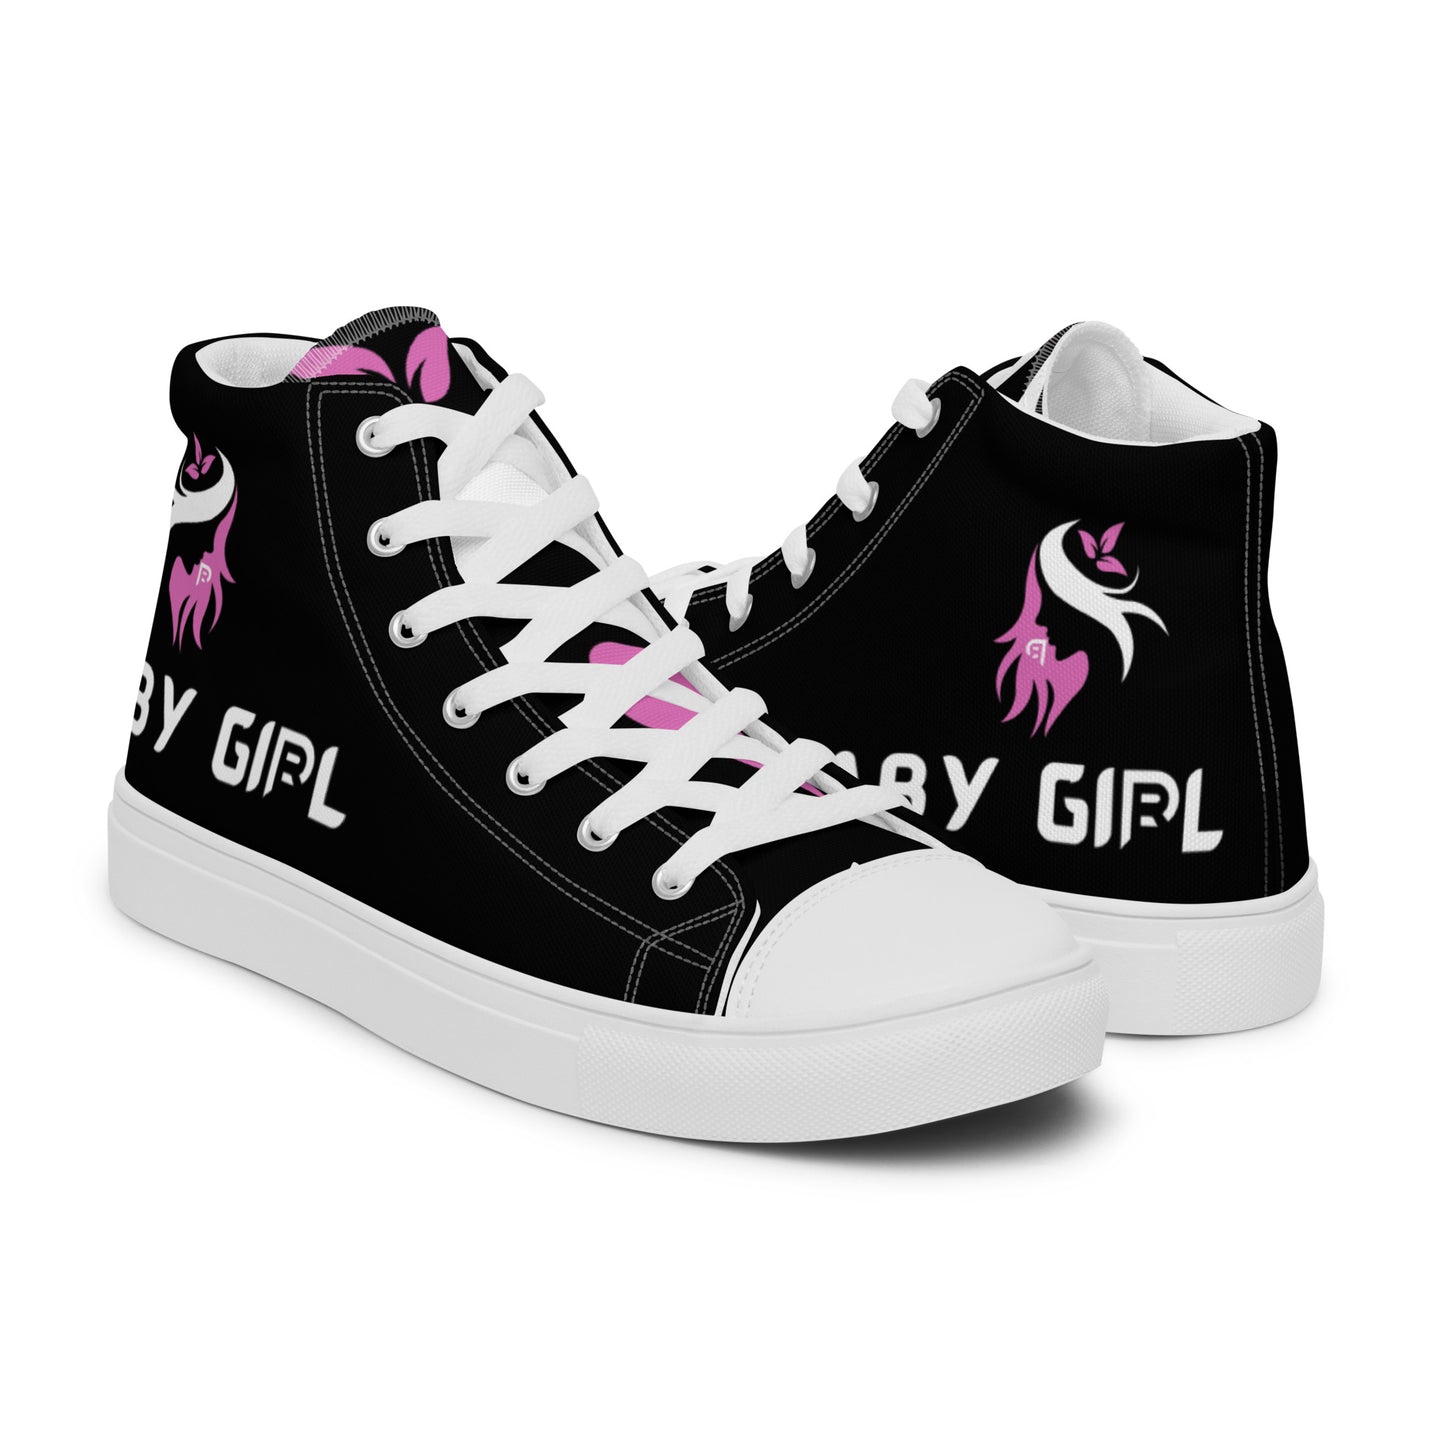 Red Weapon Baby Girl Blacked High Top Canvas Shoes